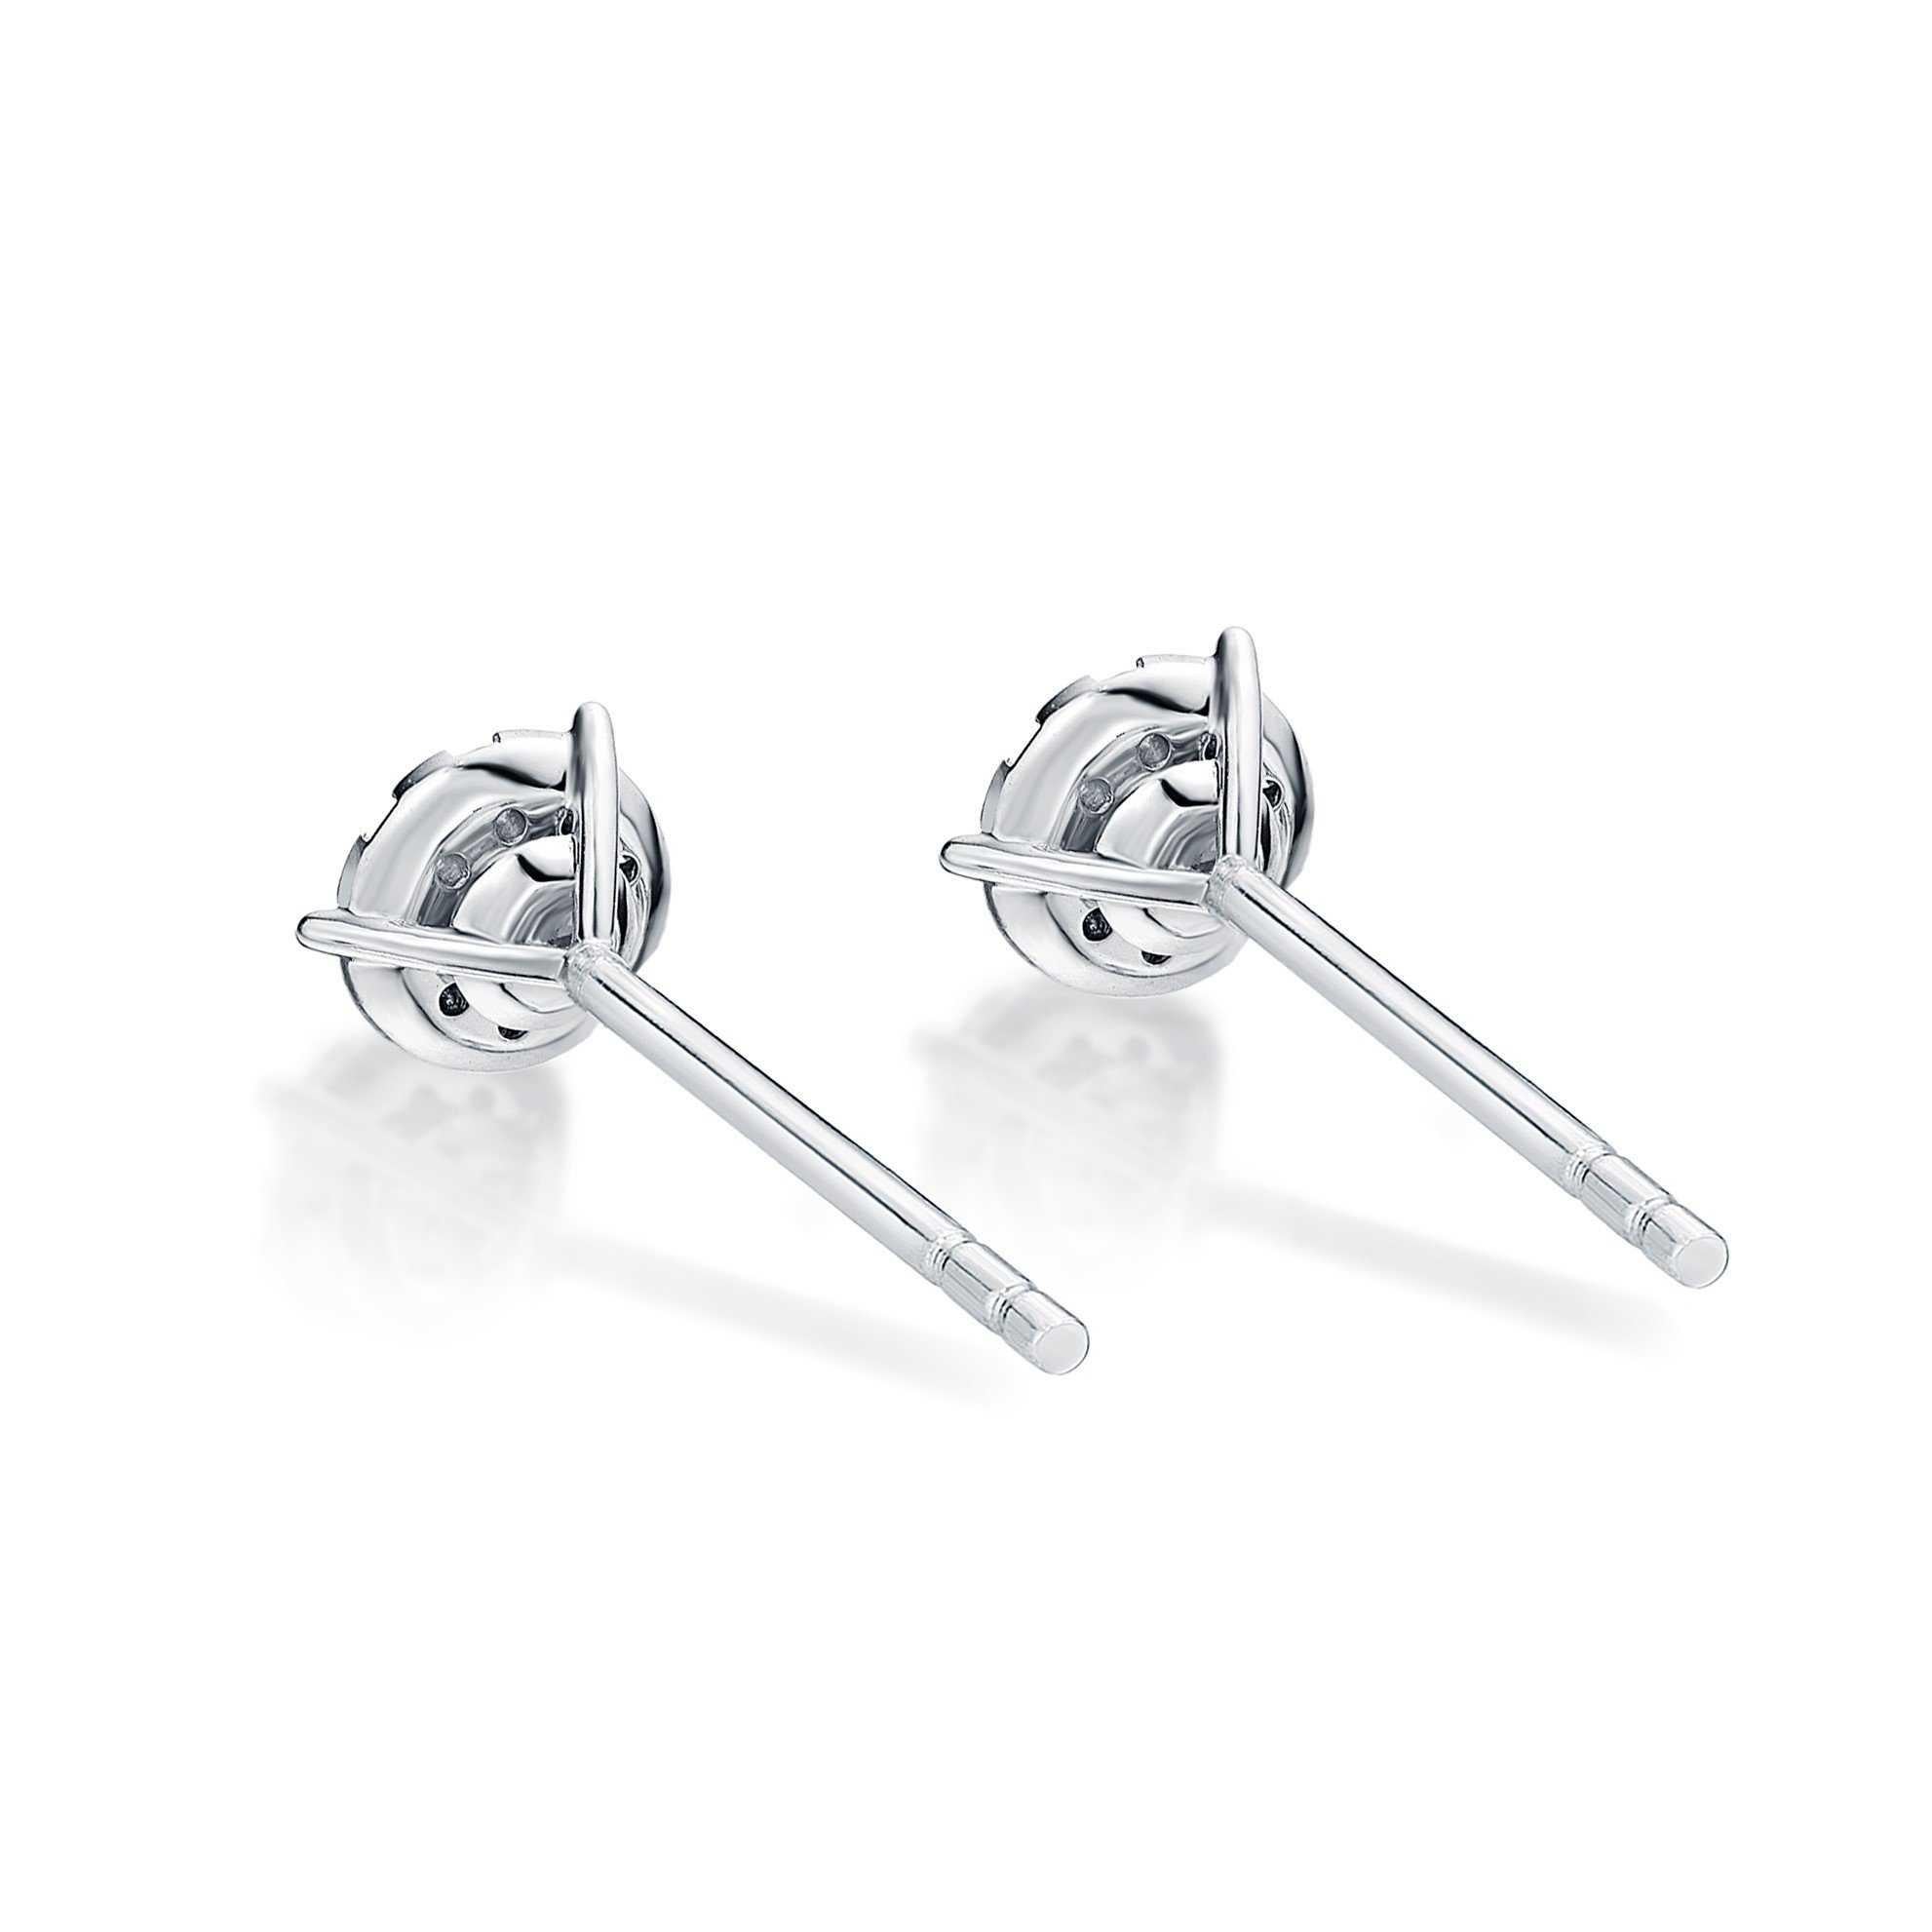 Memoire Bouquet Collection Diamond Stud Earrings 1.33 ct with 